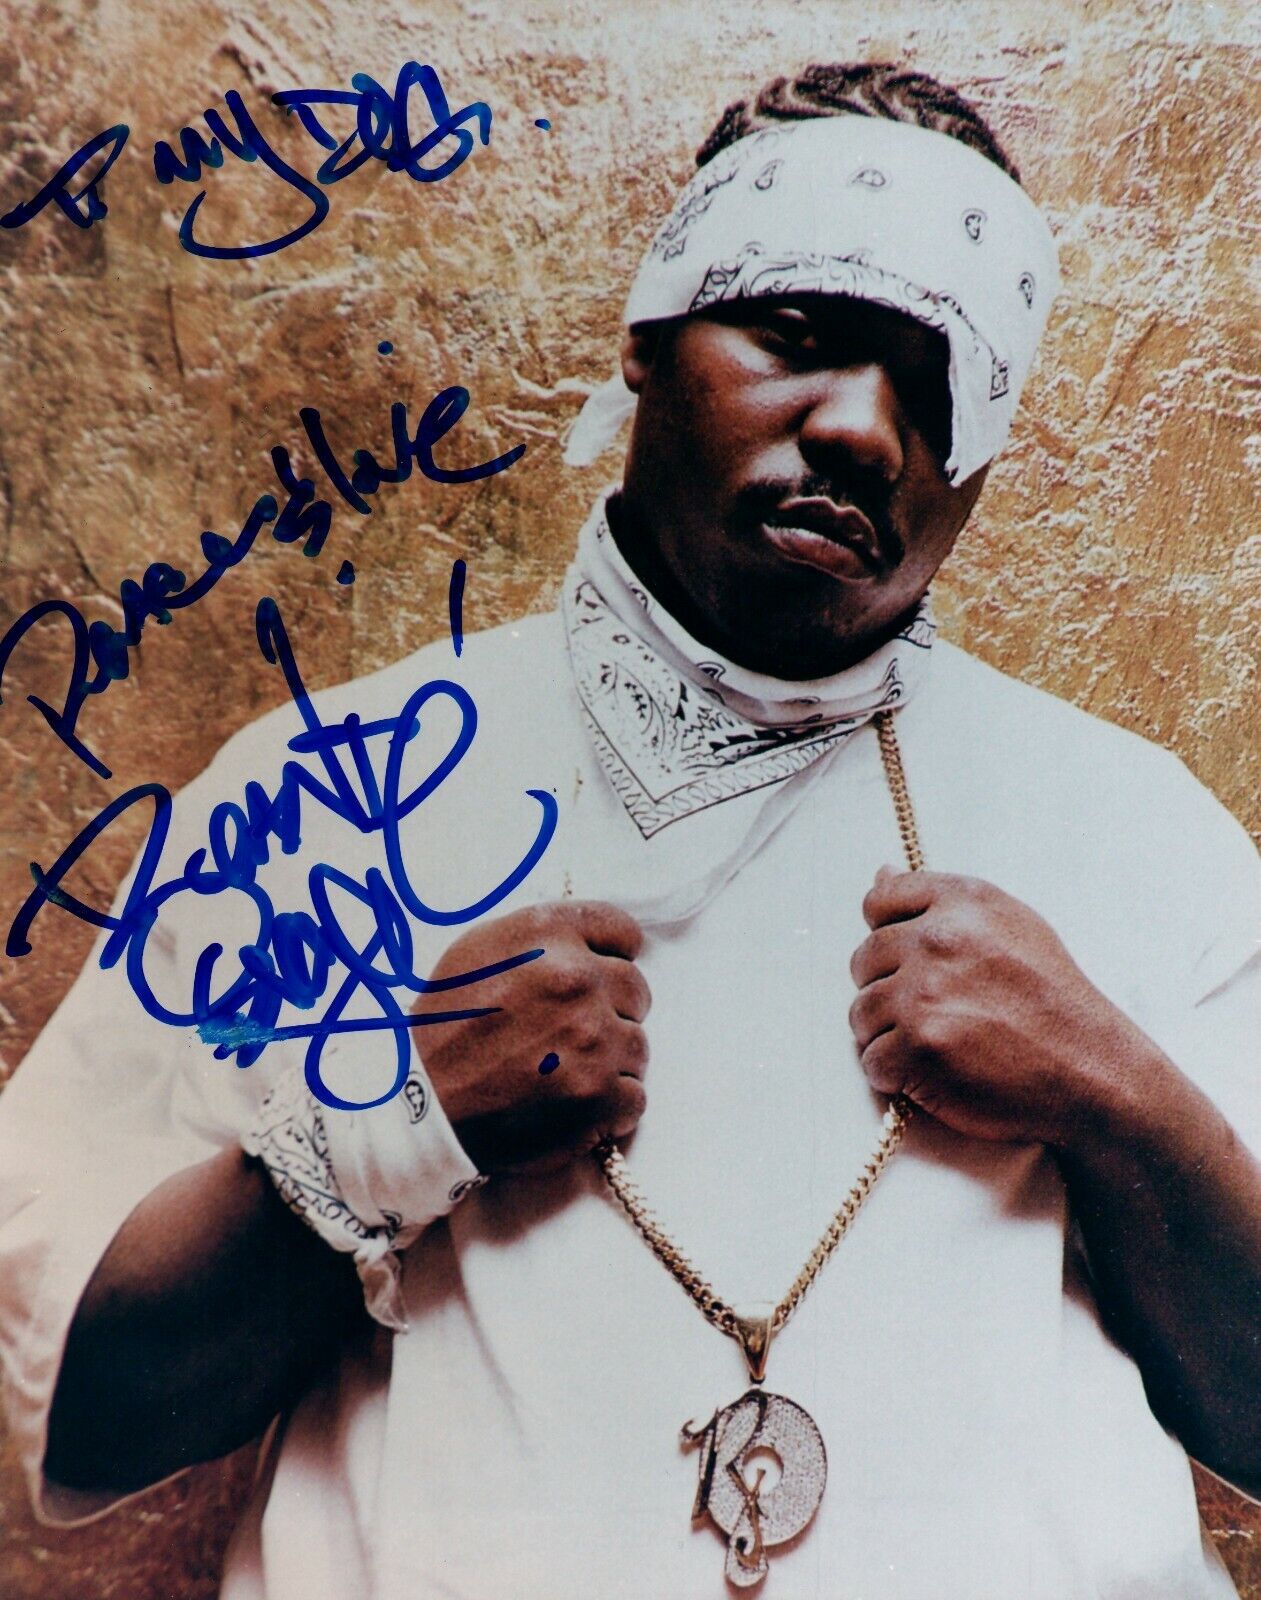 Beanie Recommendation Sigel Roc A Fella Rapper New product!! 8x10 CO Signed Autographed Photo